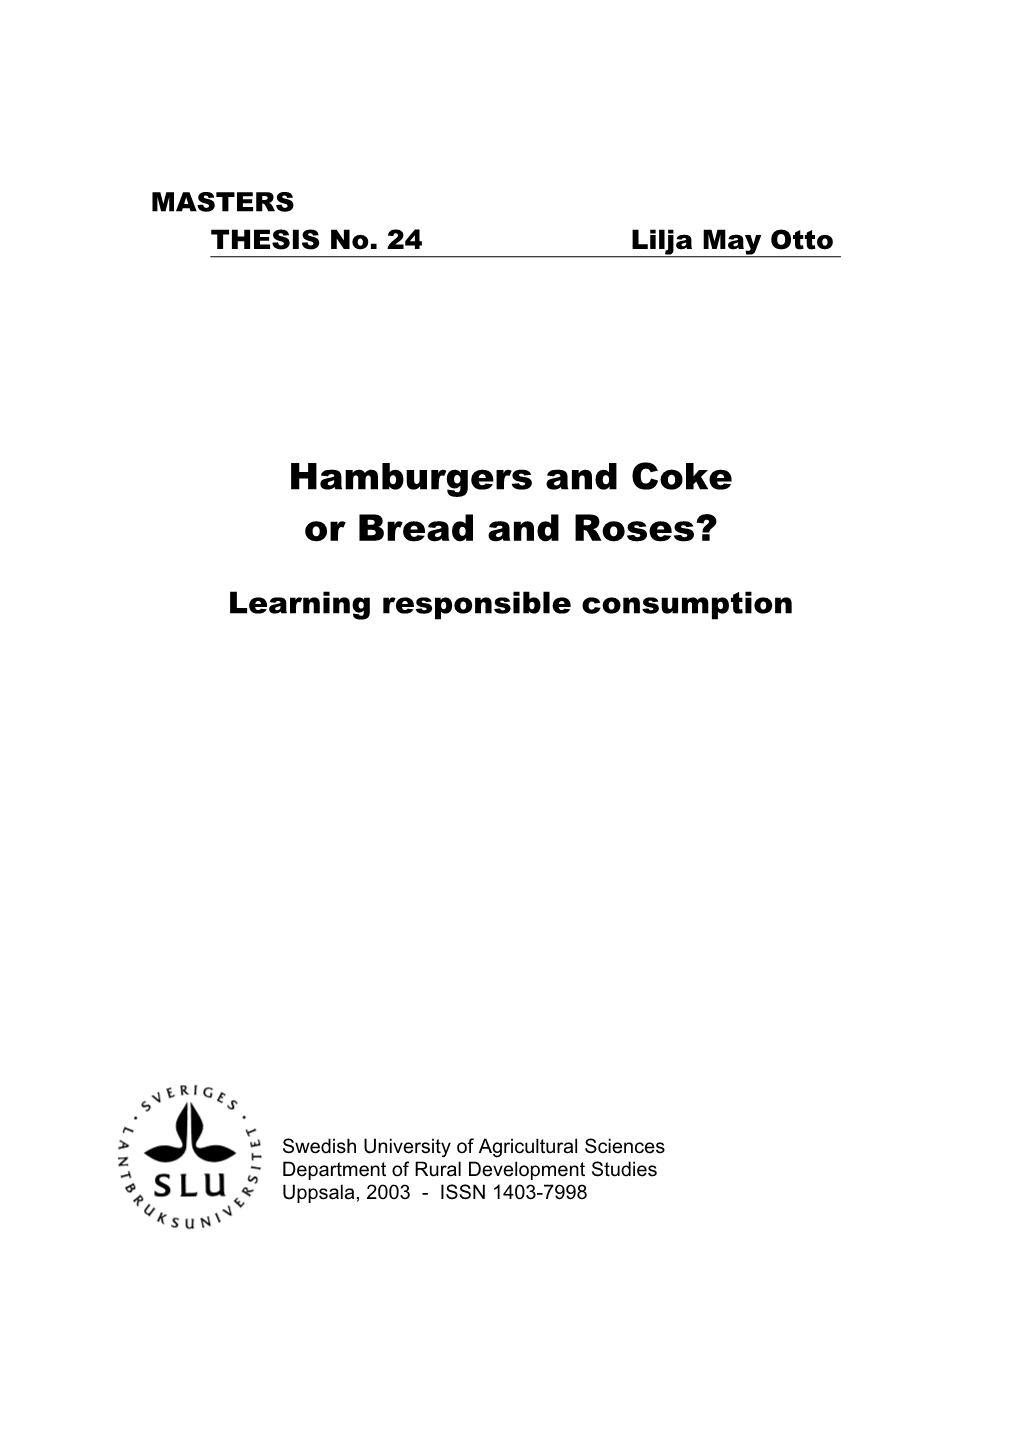 Hamburgers and Coke Or Bread and Roses?